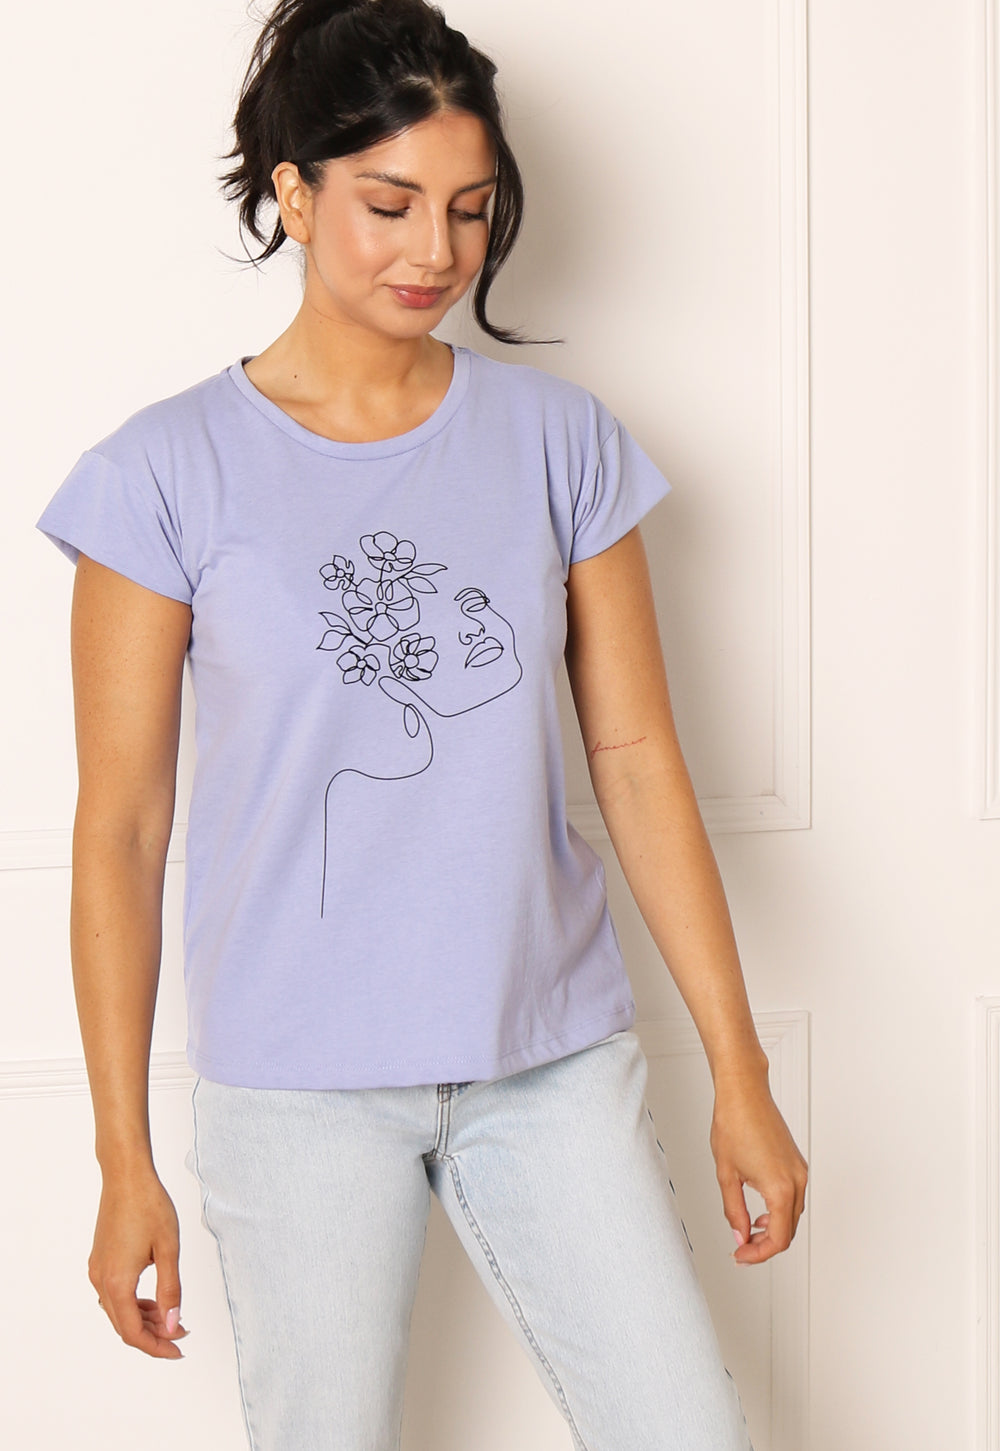 VILA Abstract One Line Woman's Face Drawing T-shirt in Light Blue - One Nation Clothing